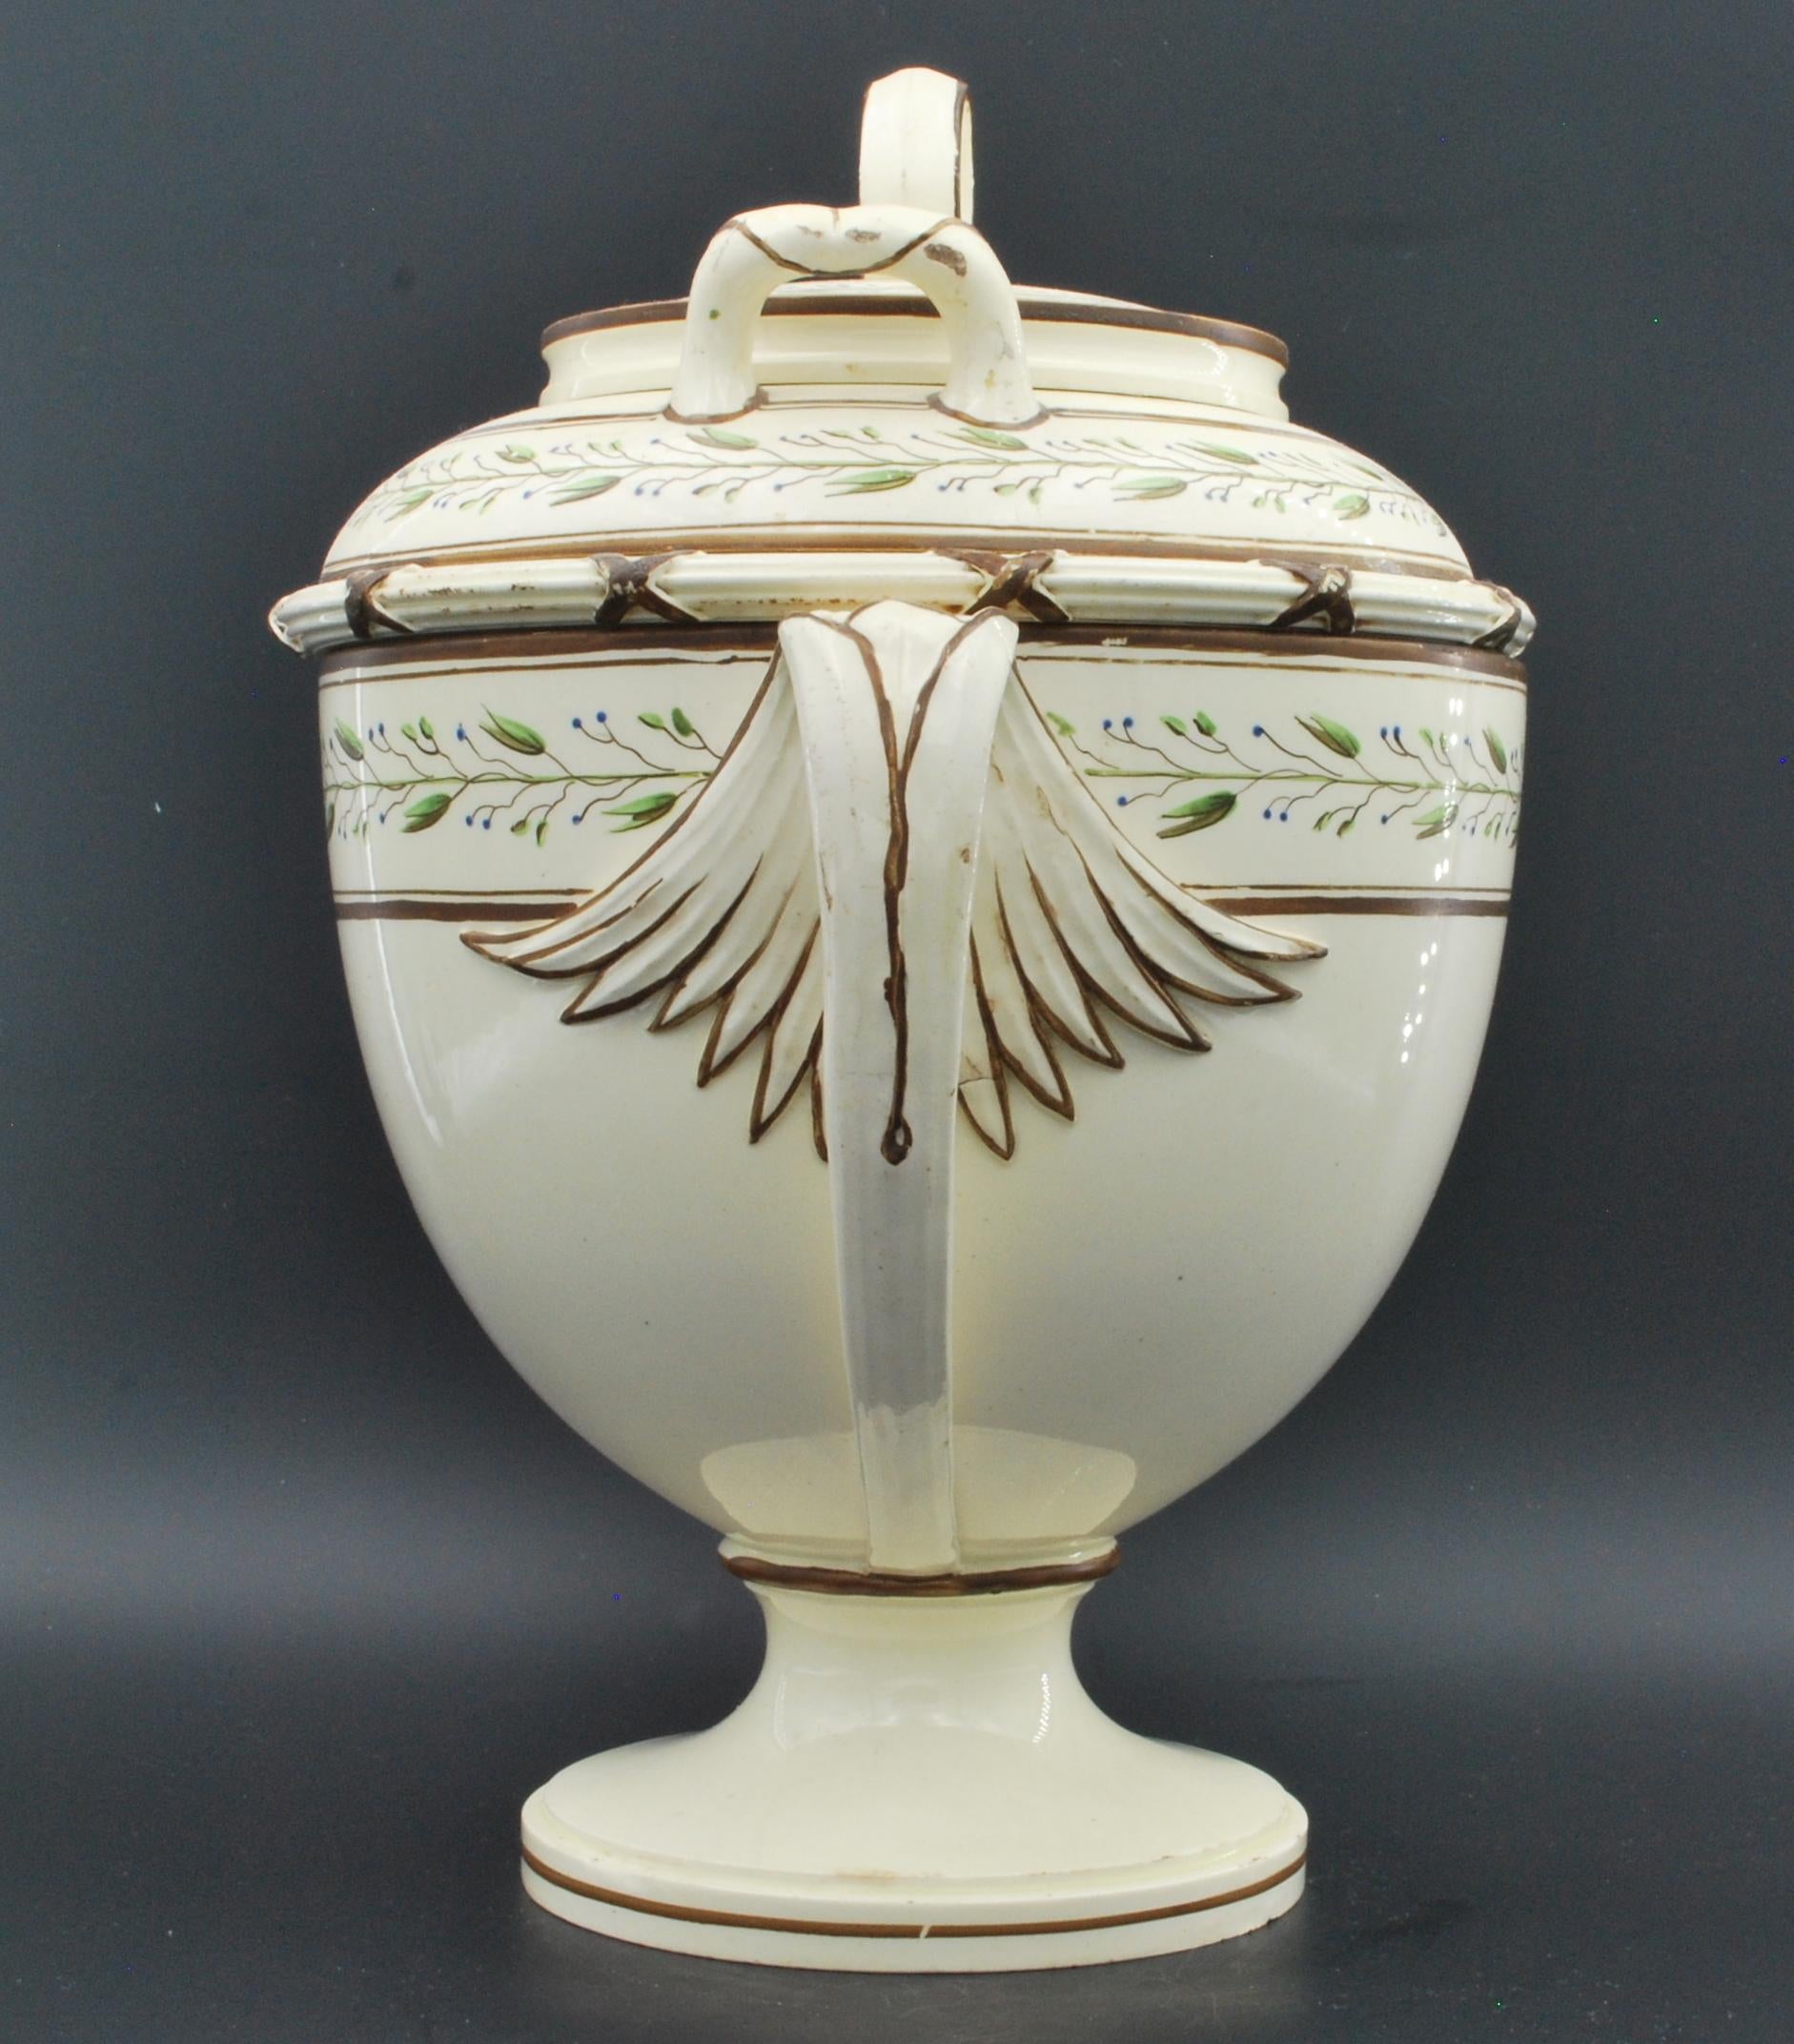 Neoclassical Glacier, or Ice-Cream Cooler. Wedgwood, C1790